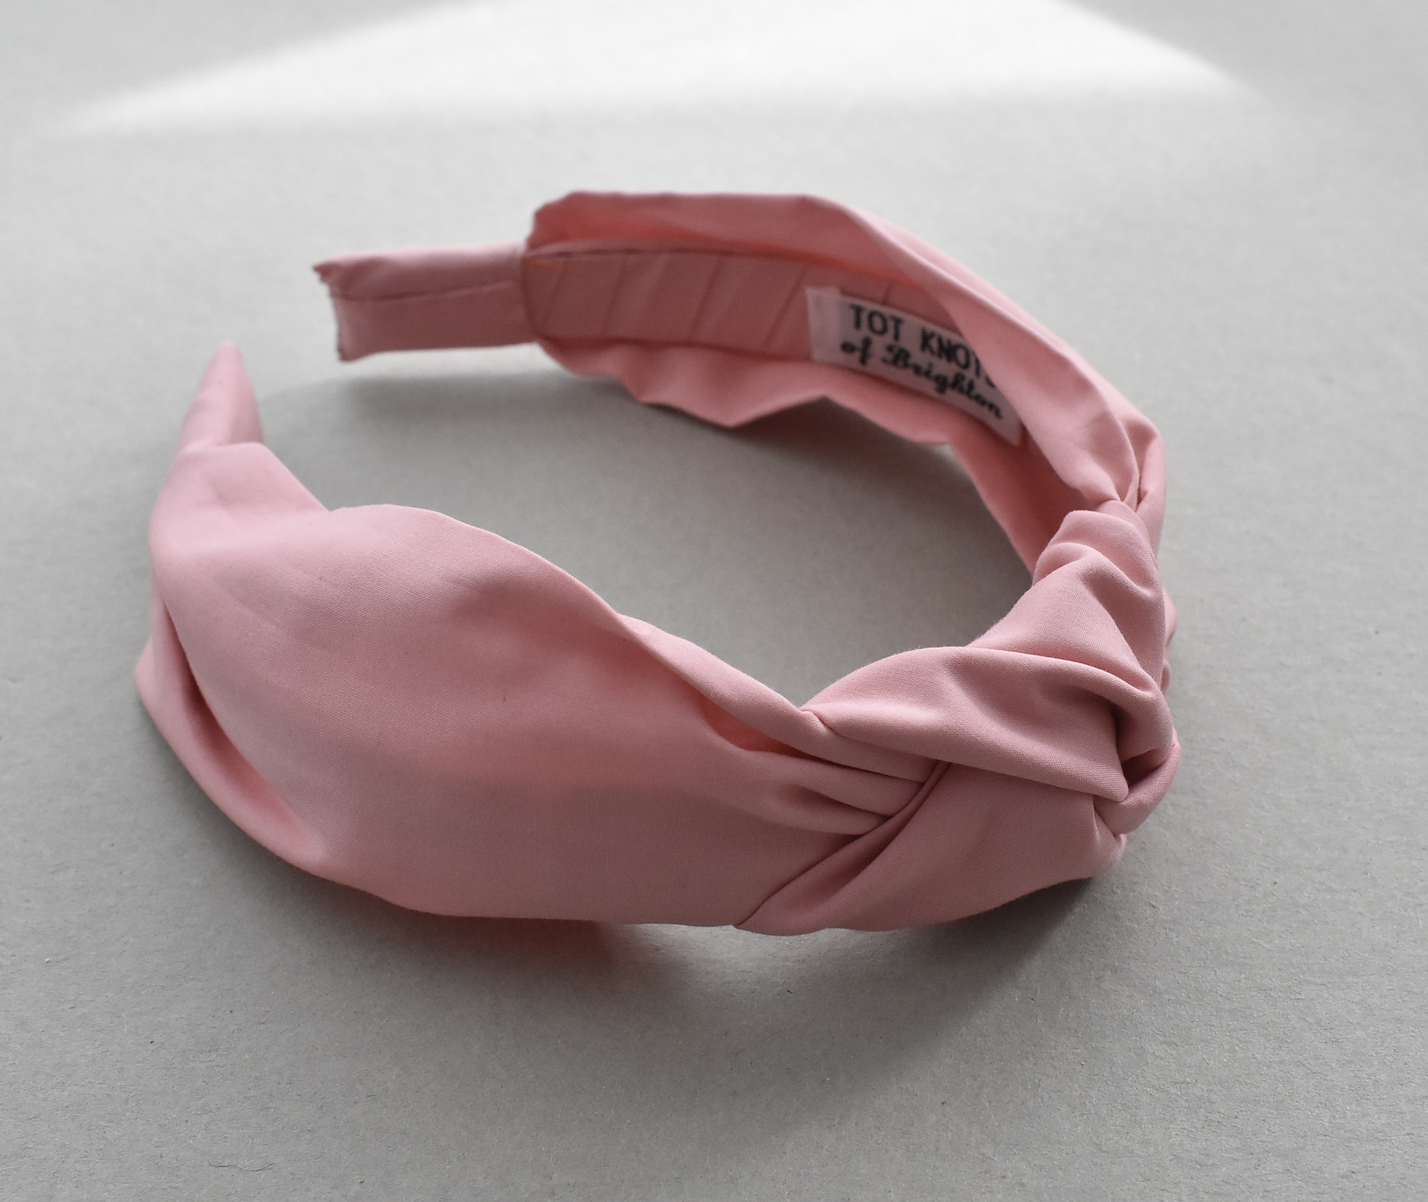 Kids Tot Knot Alice band - Liberty of London Dusty Pink